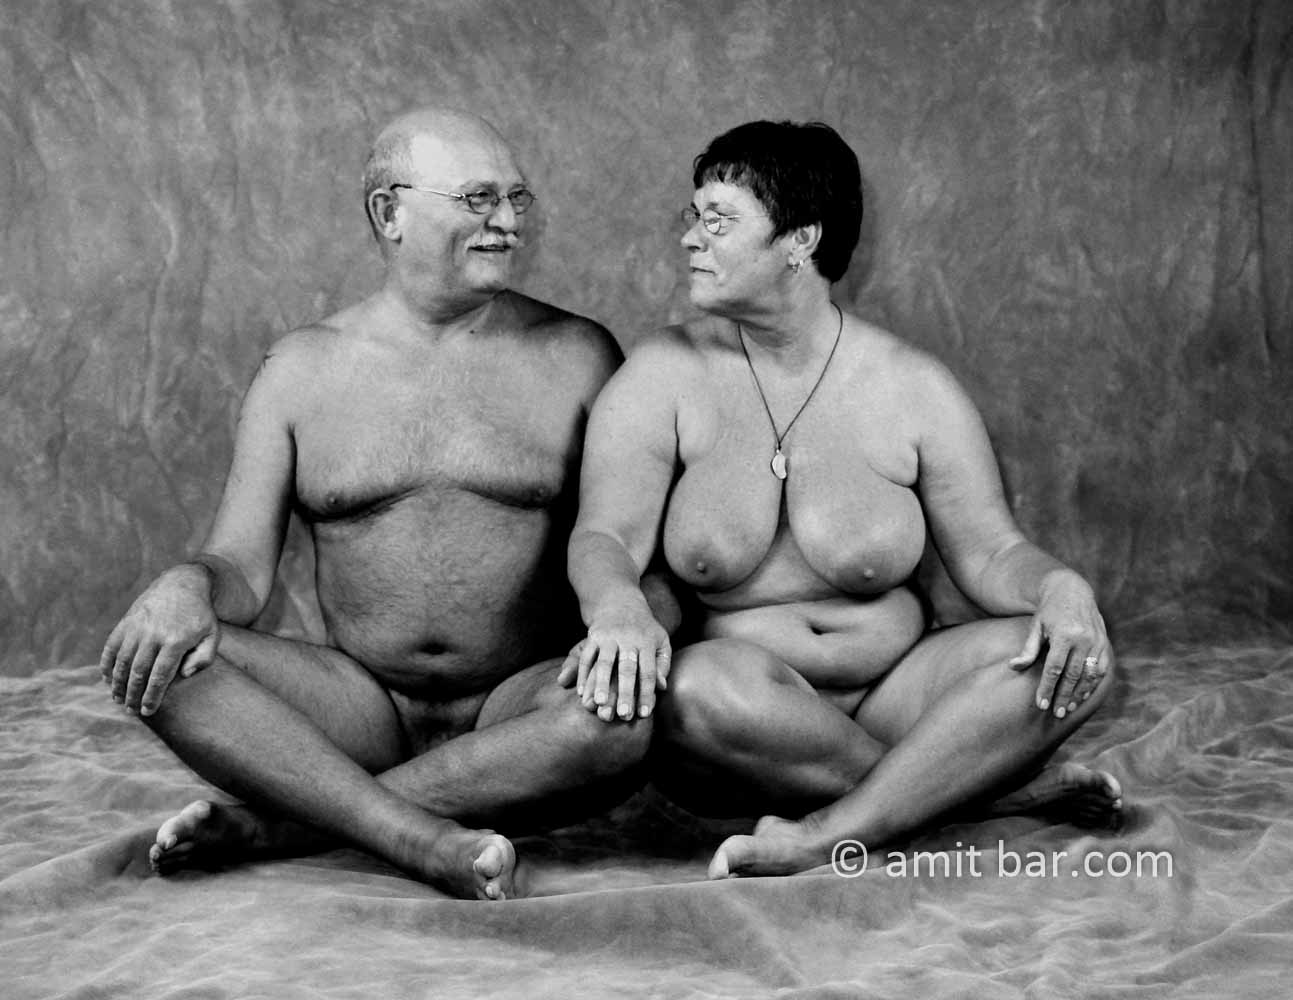 The couple: Two naturist models